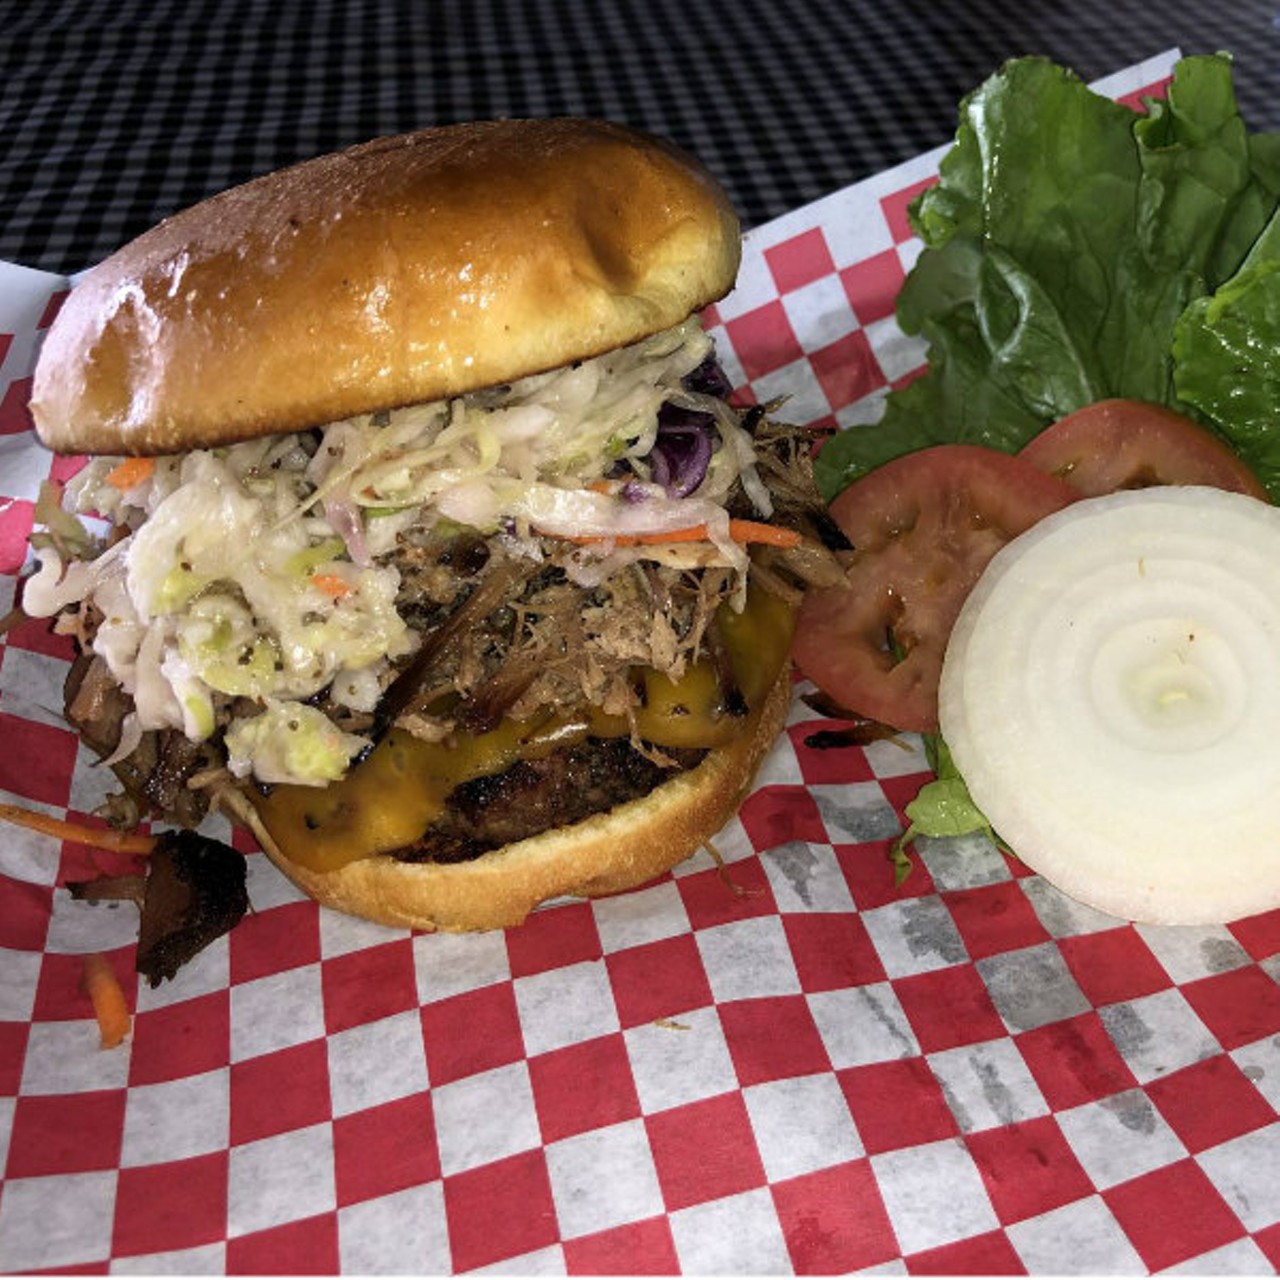 Sharpshooter&#146;s Pit & Grill
(8135 Gravois Road; 314-353-4745)
The Stanley: Our half pound burger topped with your choice of fresh smoked pulled pork or fresh smoked brisket, melted cheddar cheese and slaw on a soft, butter toasted bun,